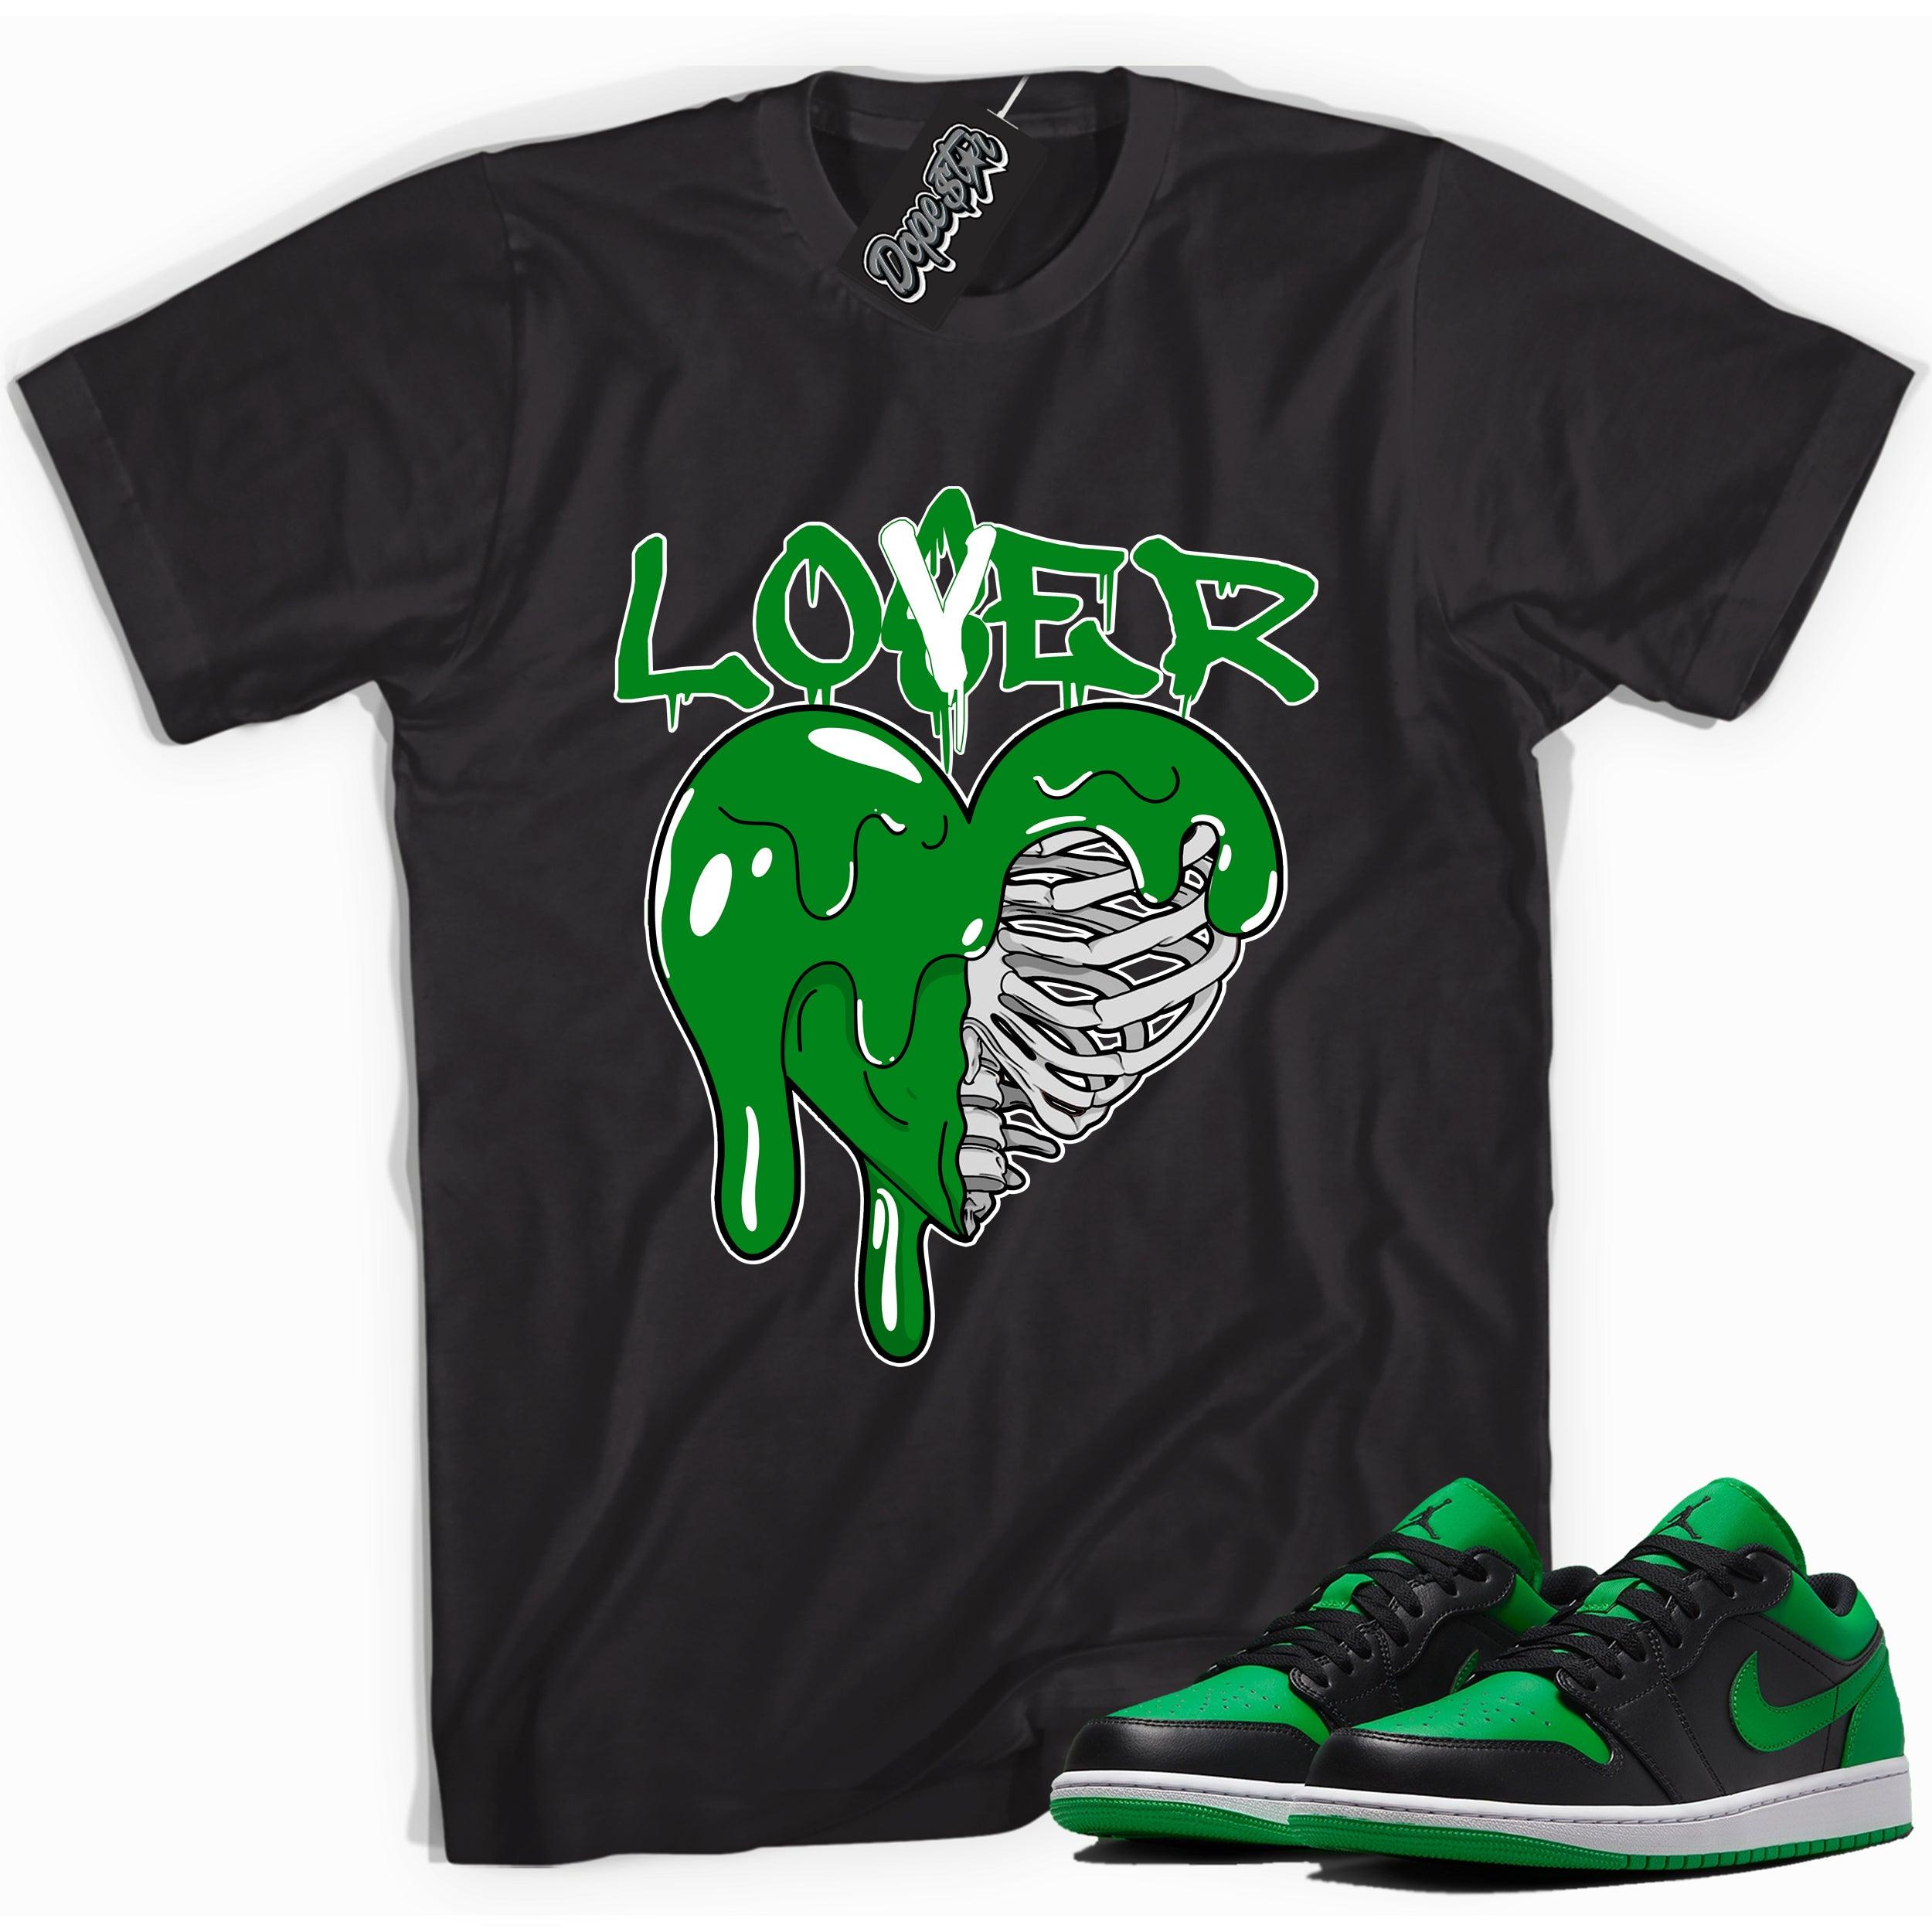 Cool black graphic tee with 'lover/loser' print, that perfectly matches Air Jordan 1 Low Lucky Green sneakers